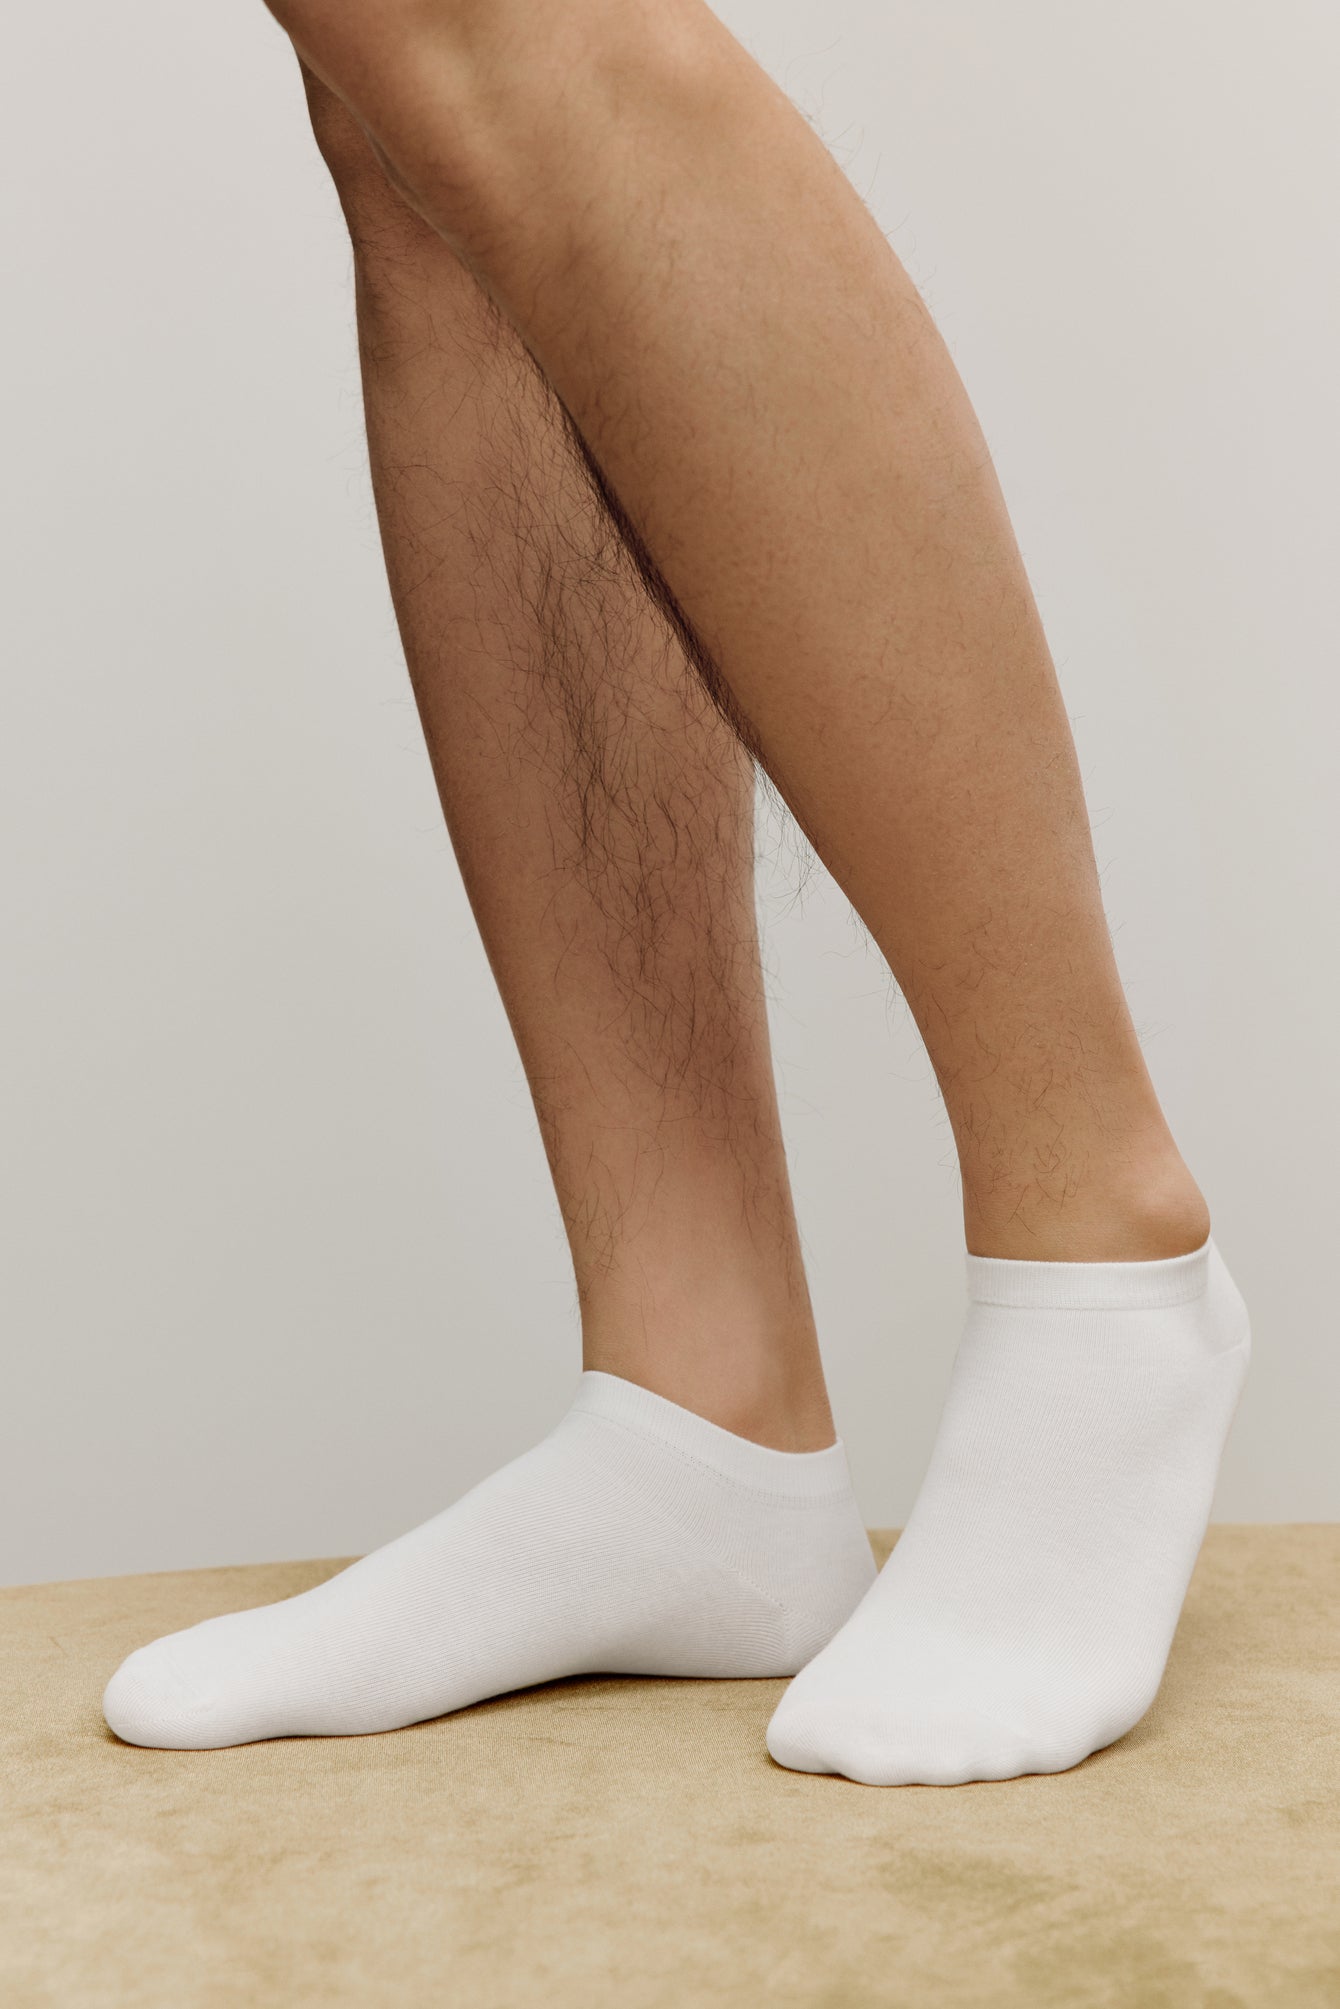 side view of a person wearing white socks